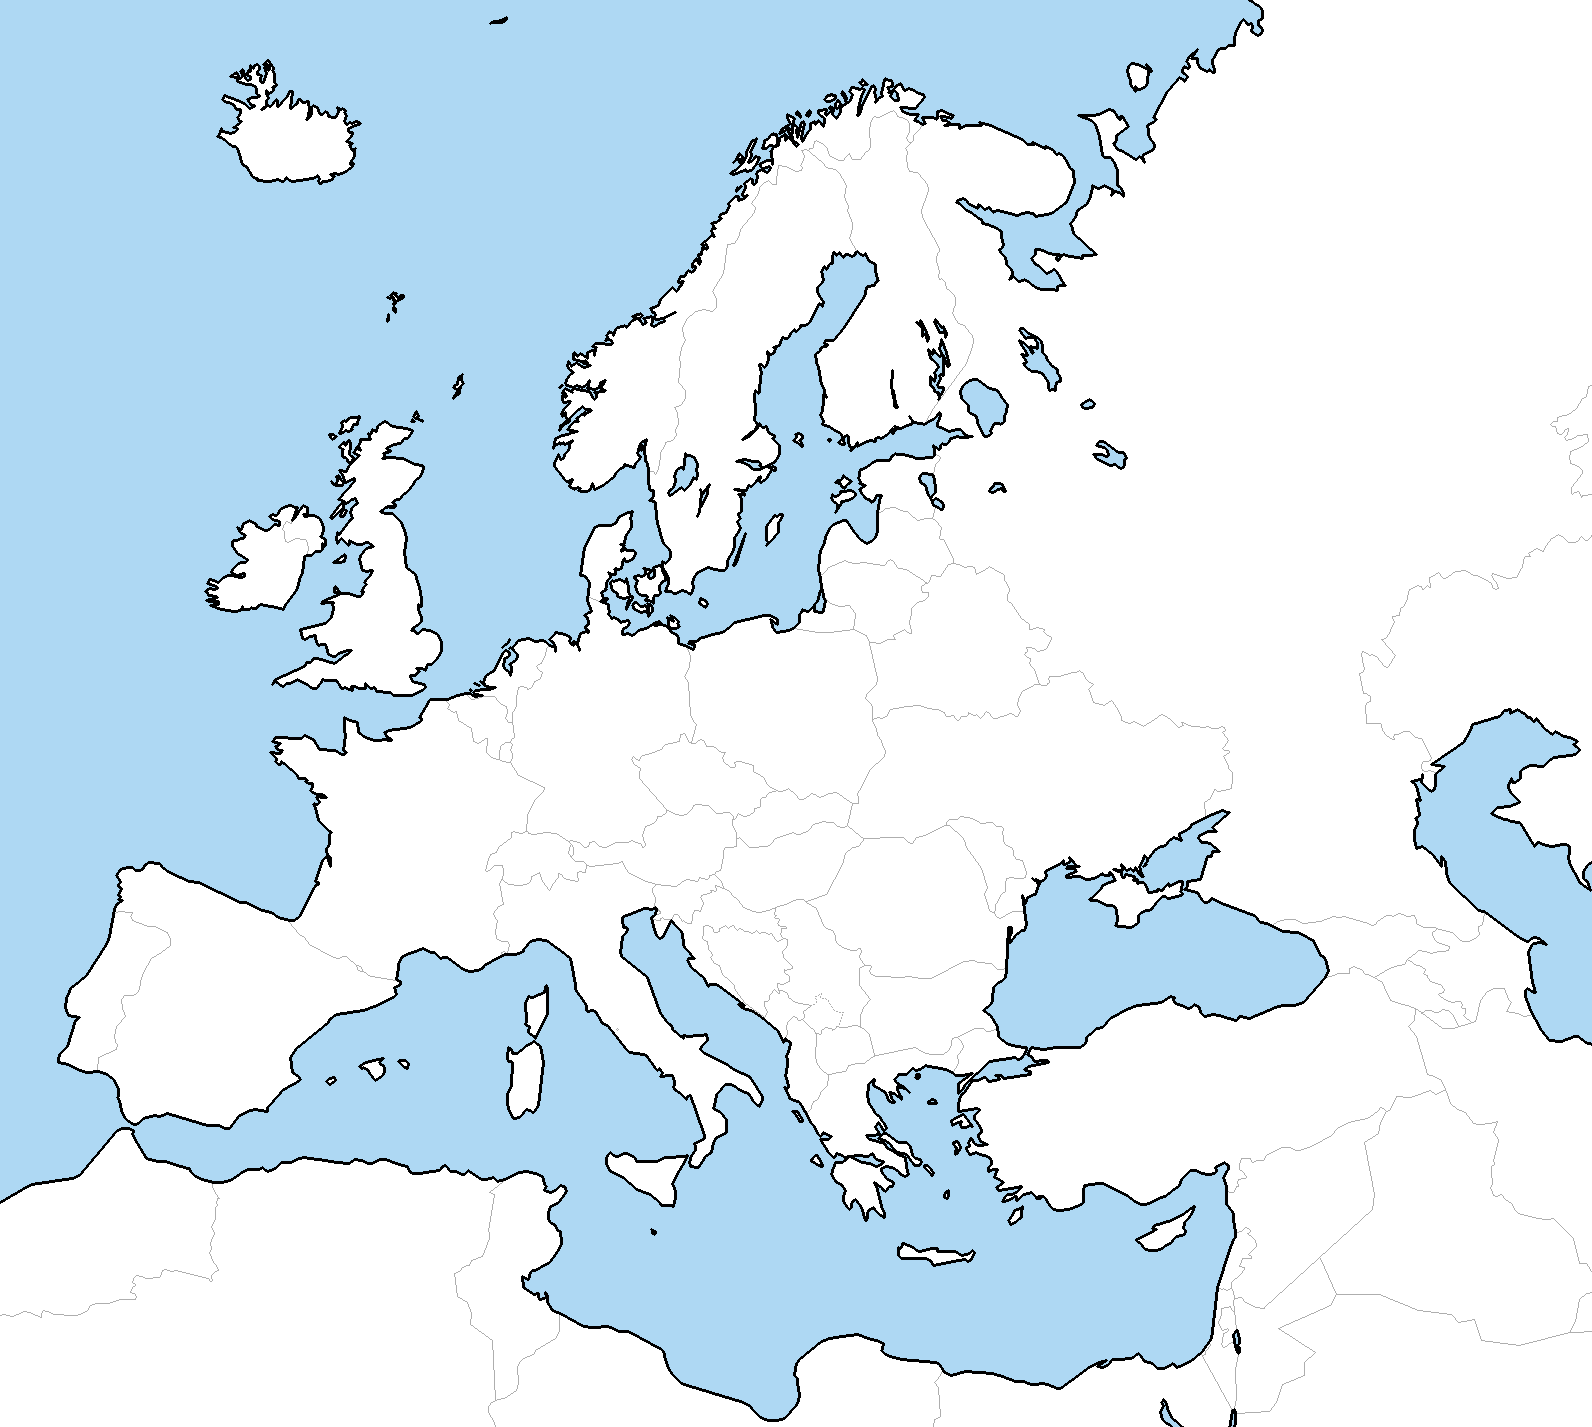 blank-europe-map-by-neethis-on-deviantart